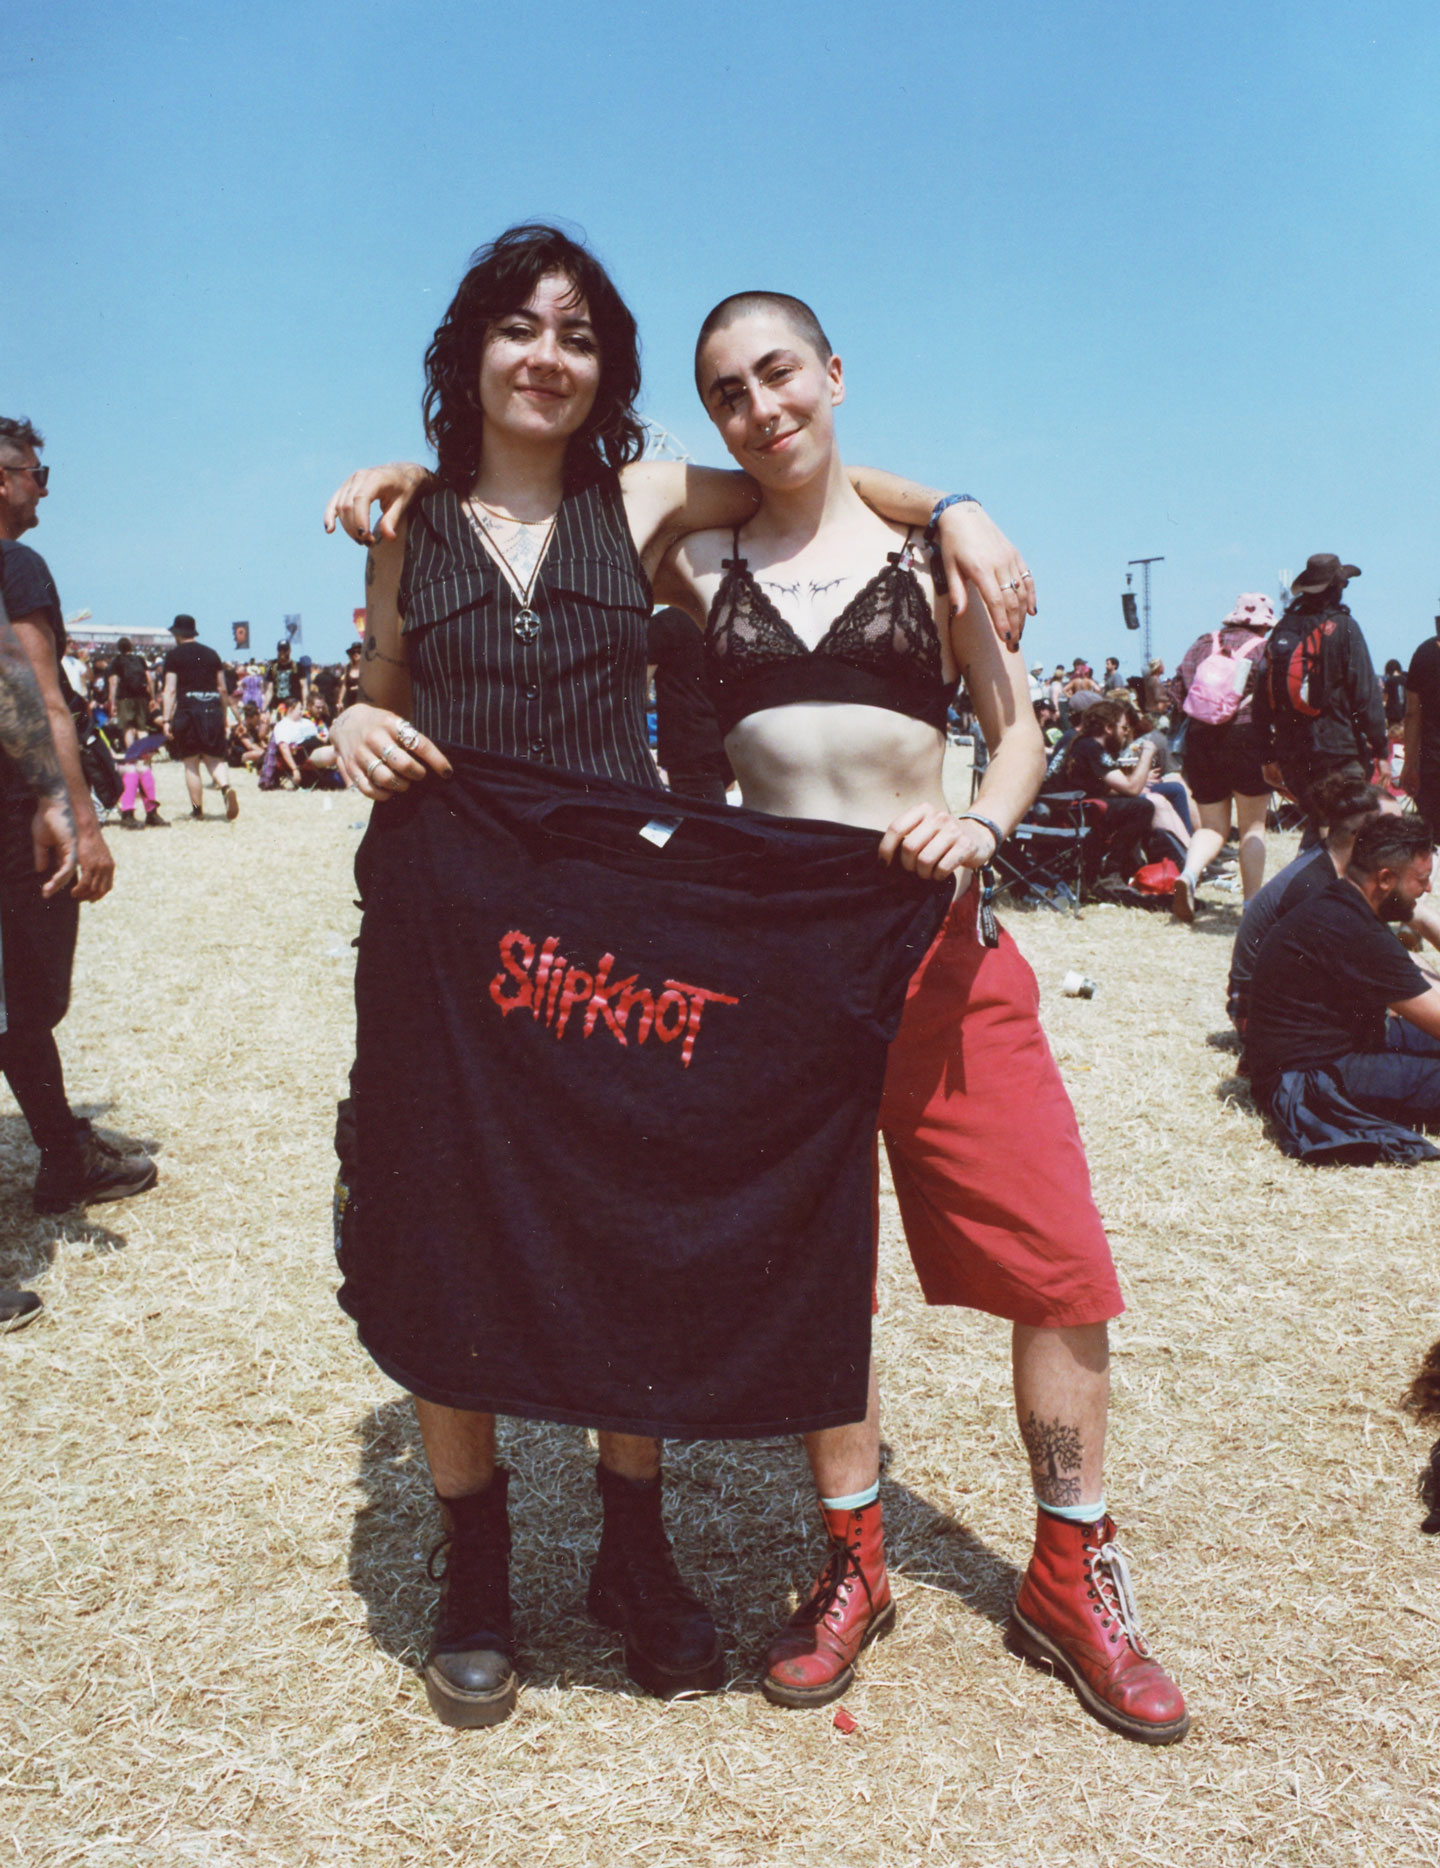 siblings wearing doc marten boots with gothic clothing (one in a pinstriped waistcoat, the other in a lace bra with a shaved head) hold a Slipknot tee between them